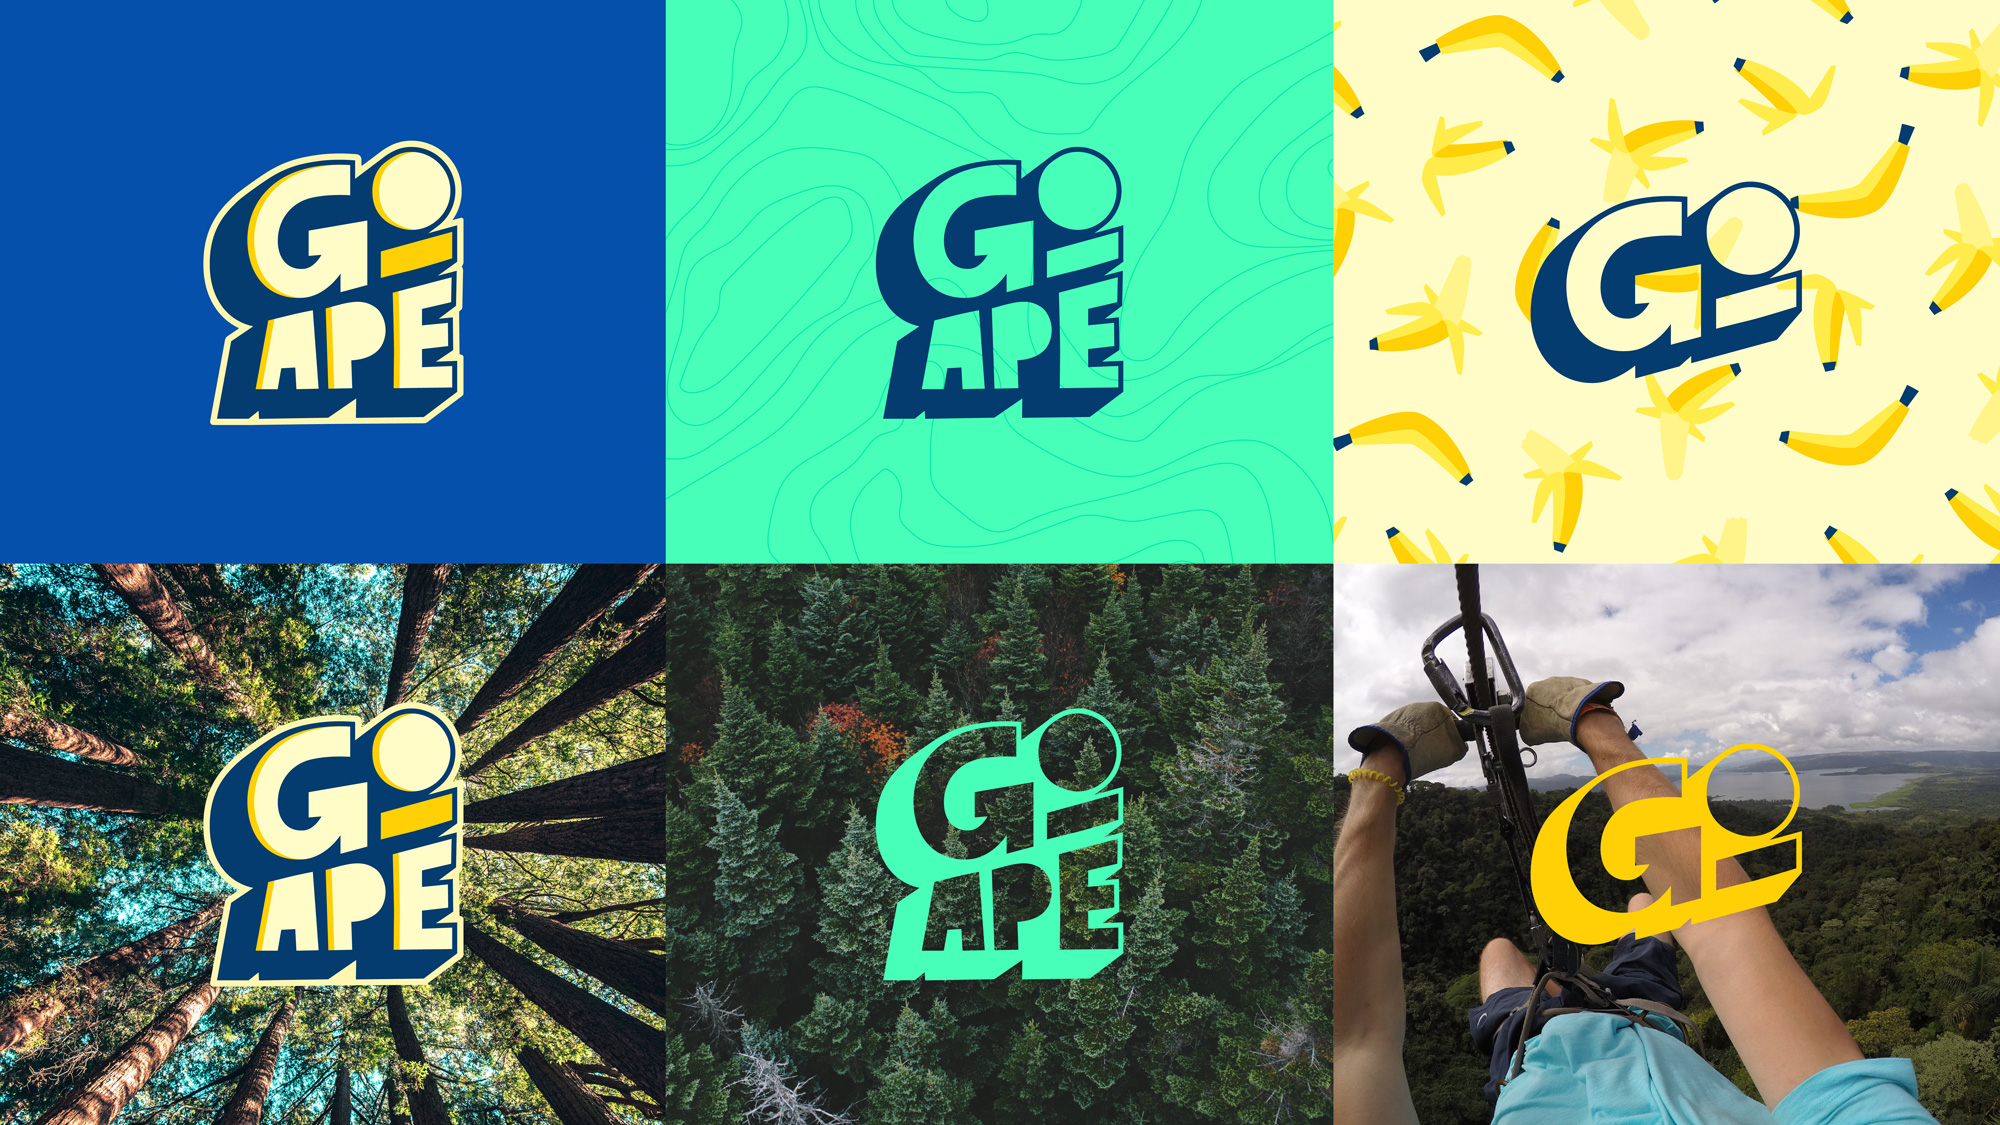 New Logo and Identity for Go Ape by Littlehawk